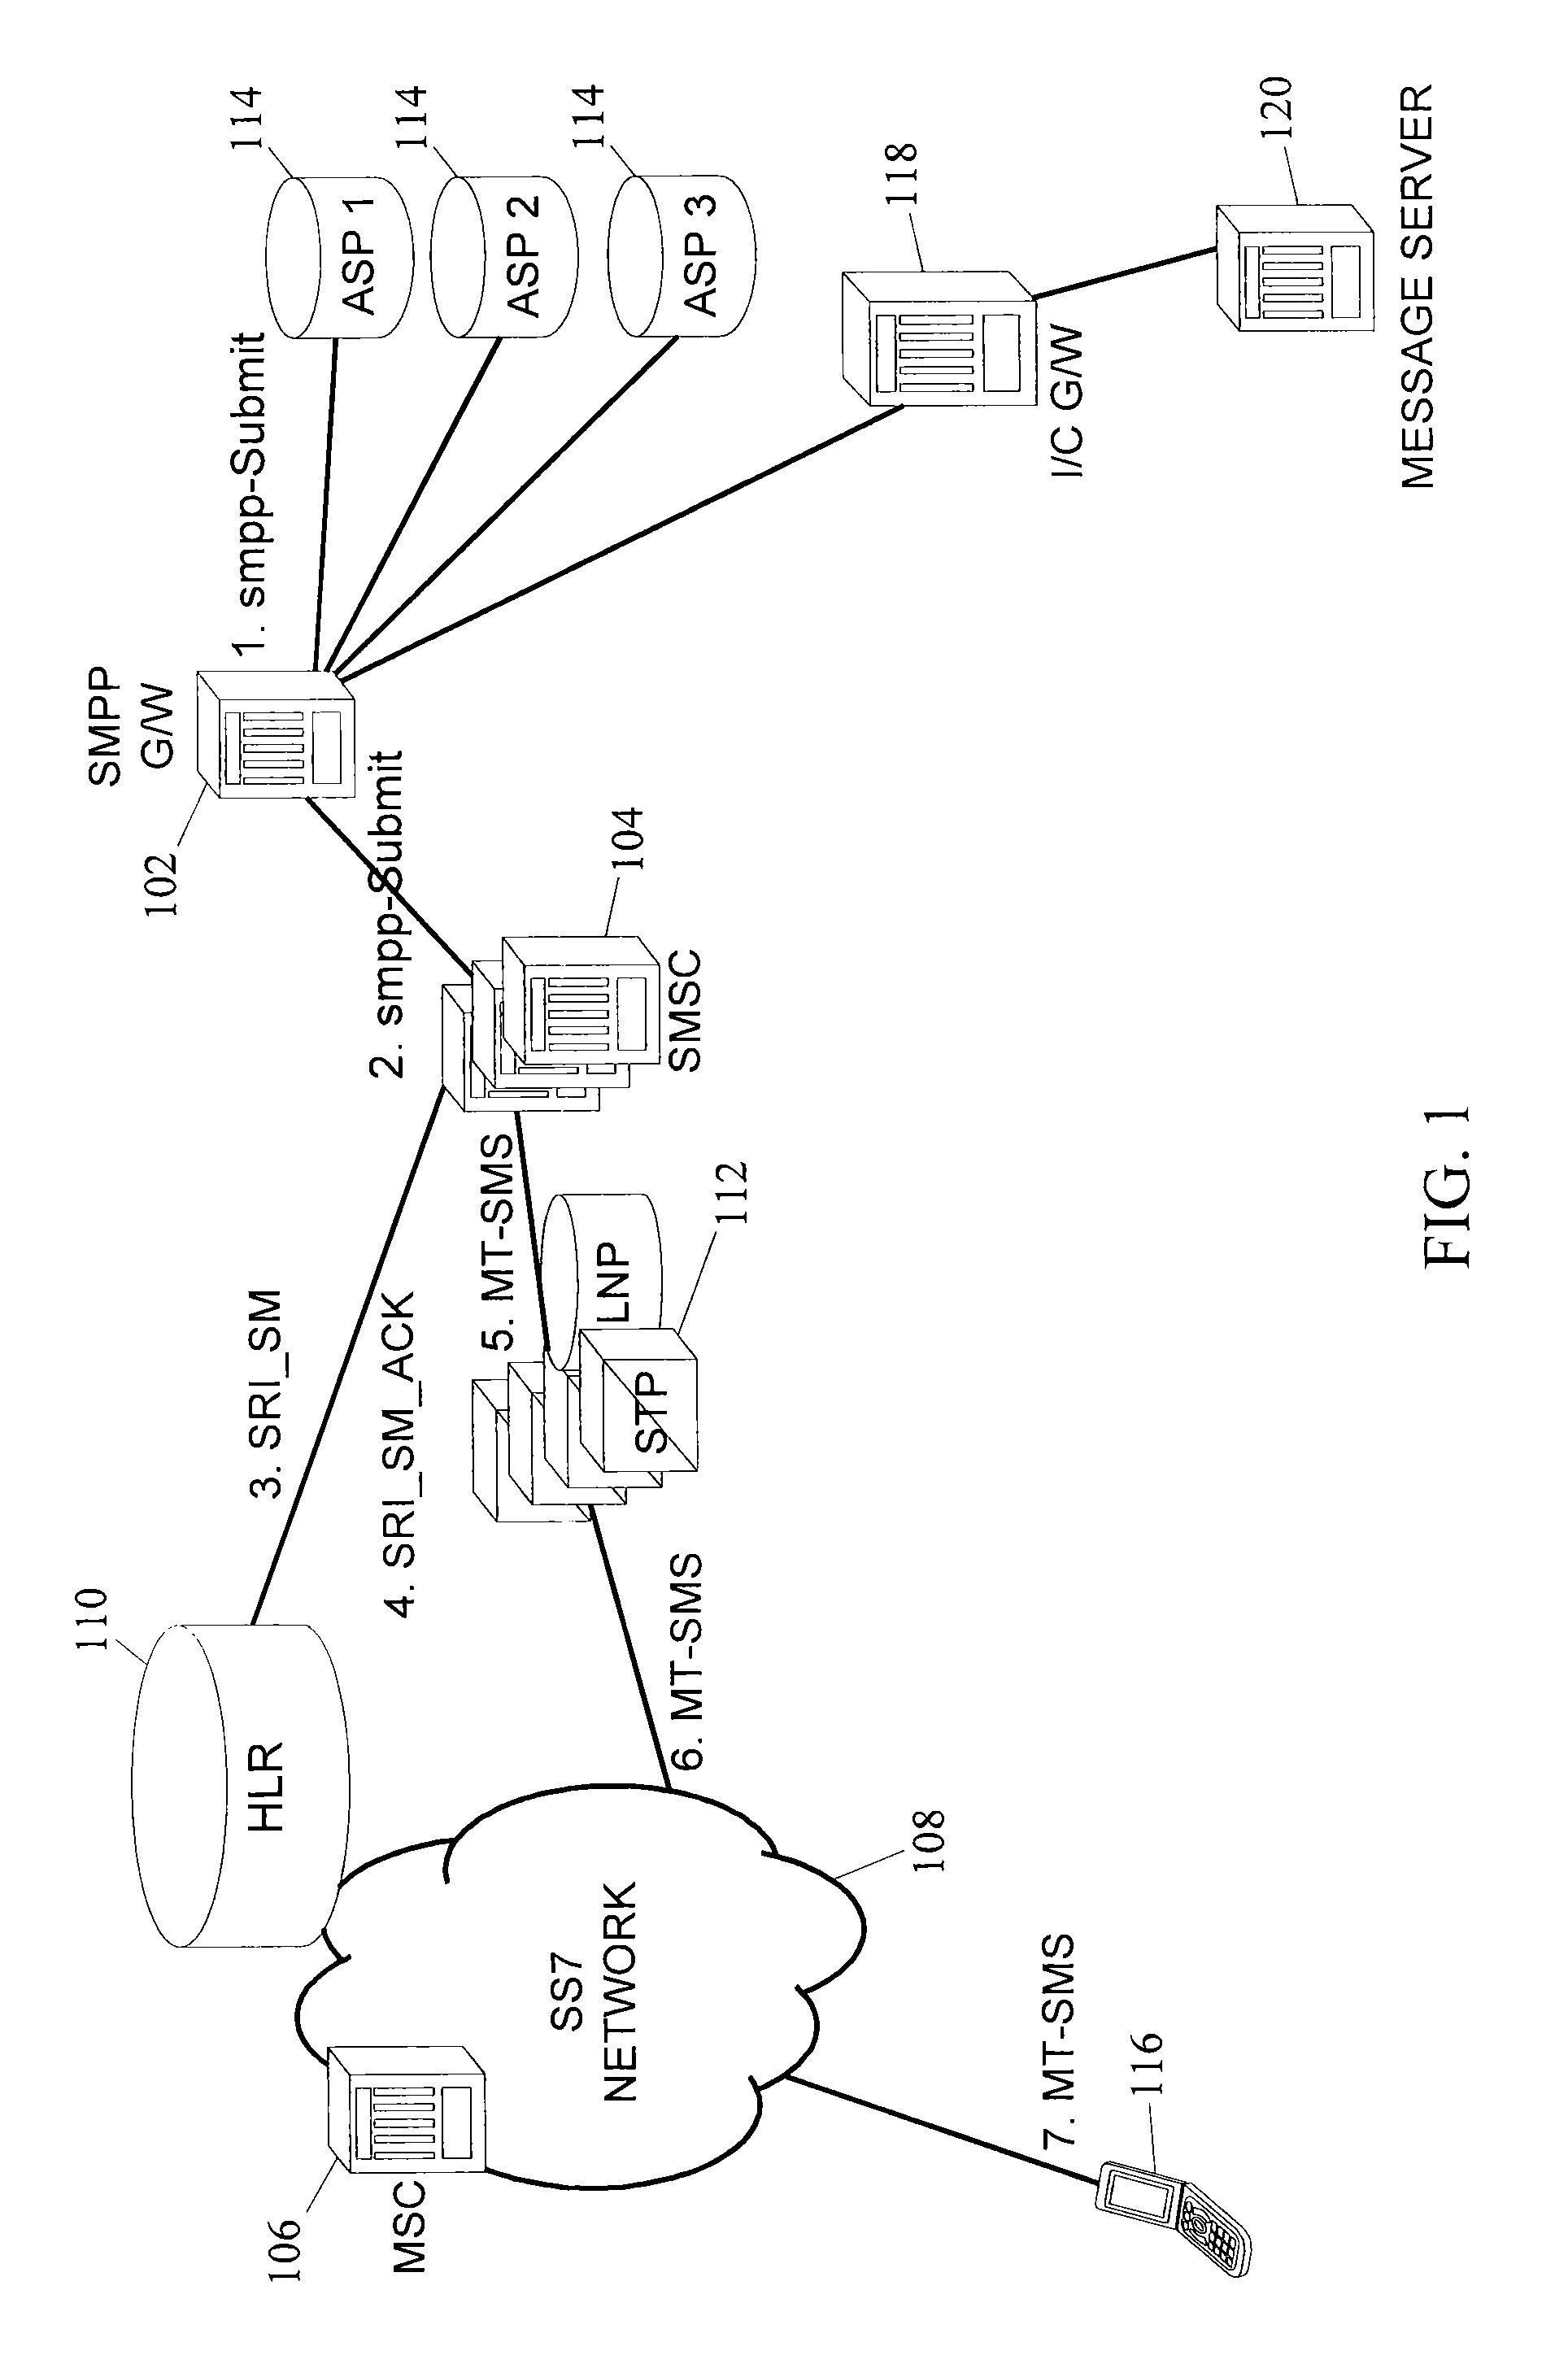 Methods, systems, and computer program products for providing first delivery attempt service for short message peer-to-peer (SMPP) messages